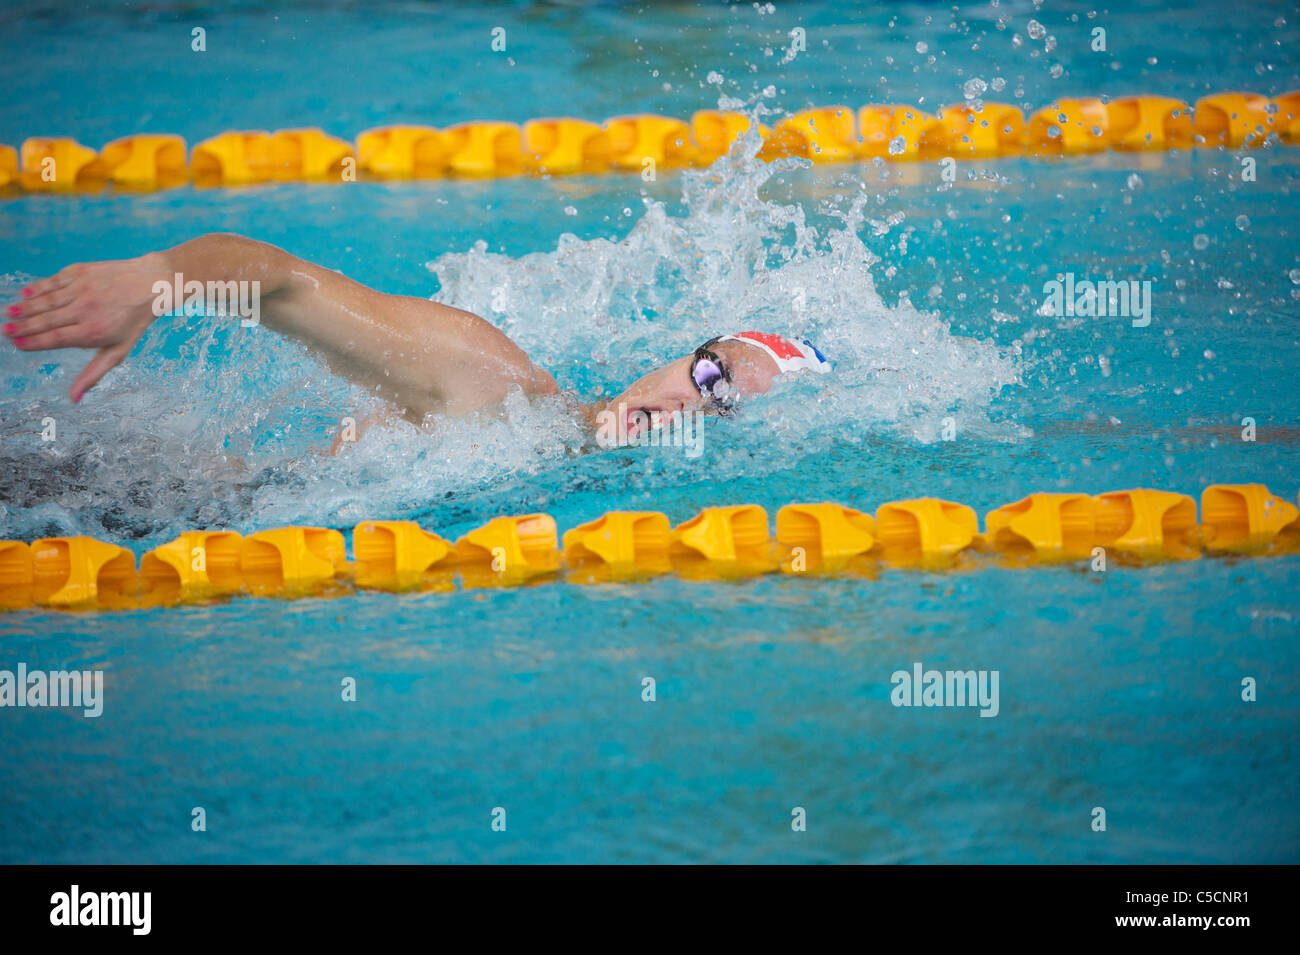 Modern Pentathlon World Cup Final, Elodie Clouvel (FRA) competes in the 200m freestyle swim Stock Photo